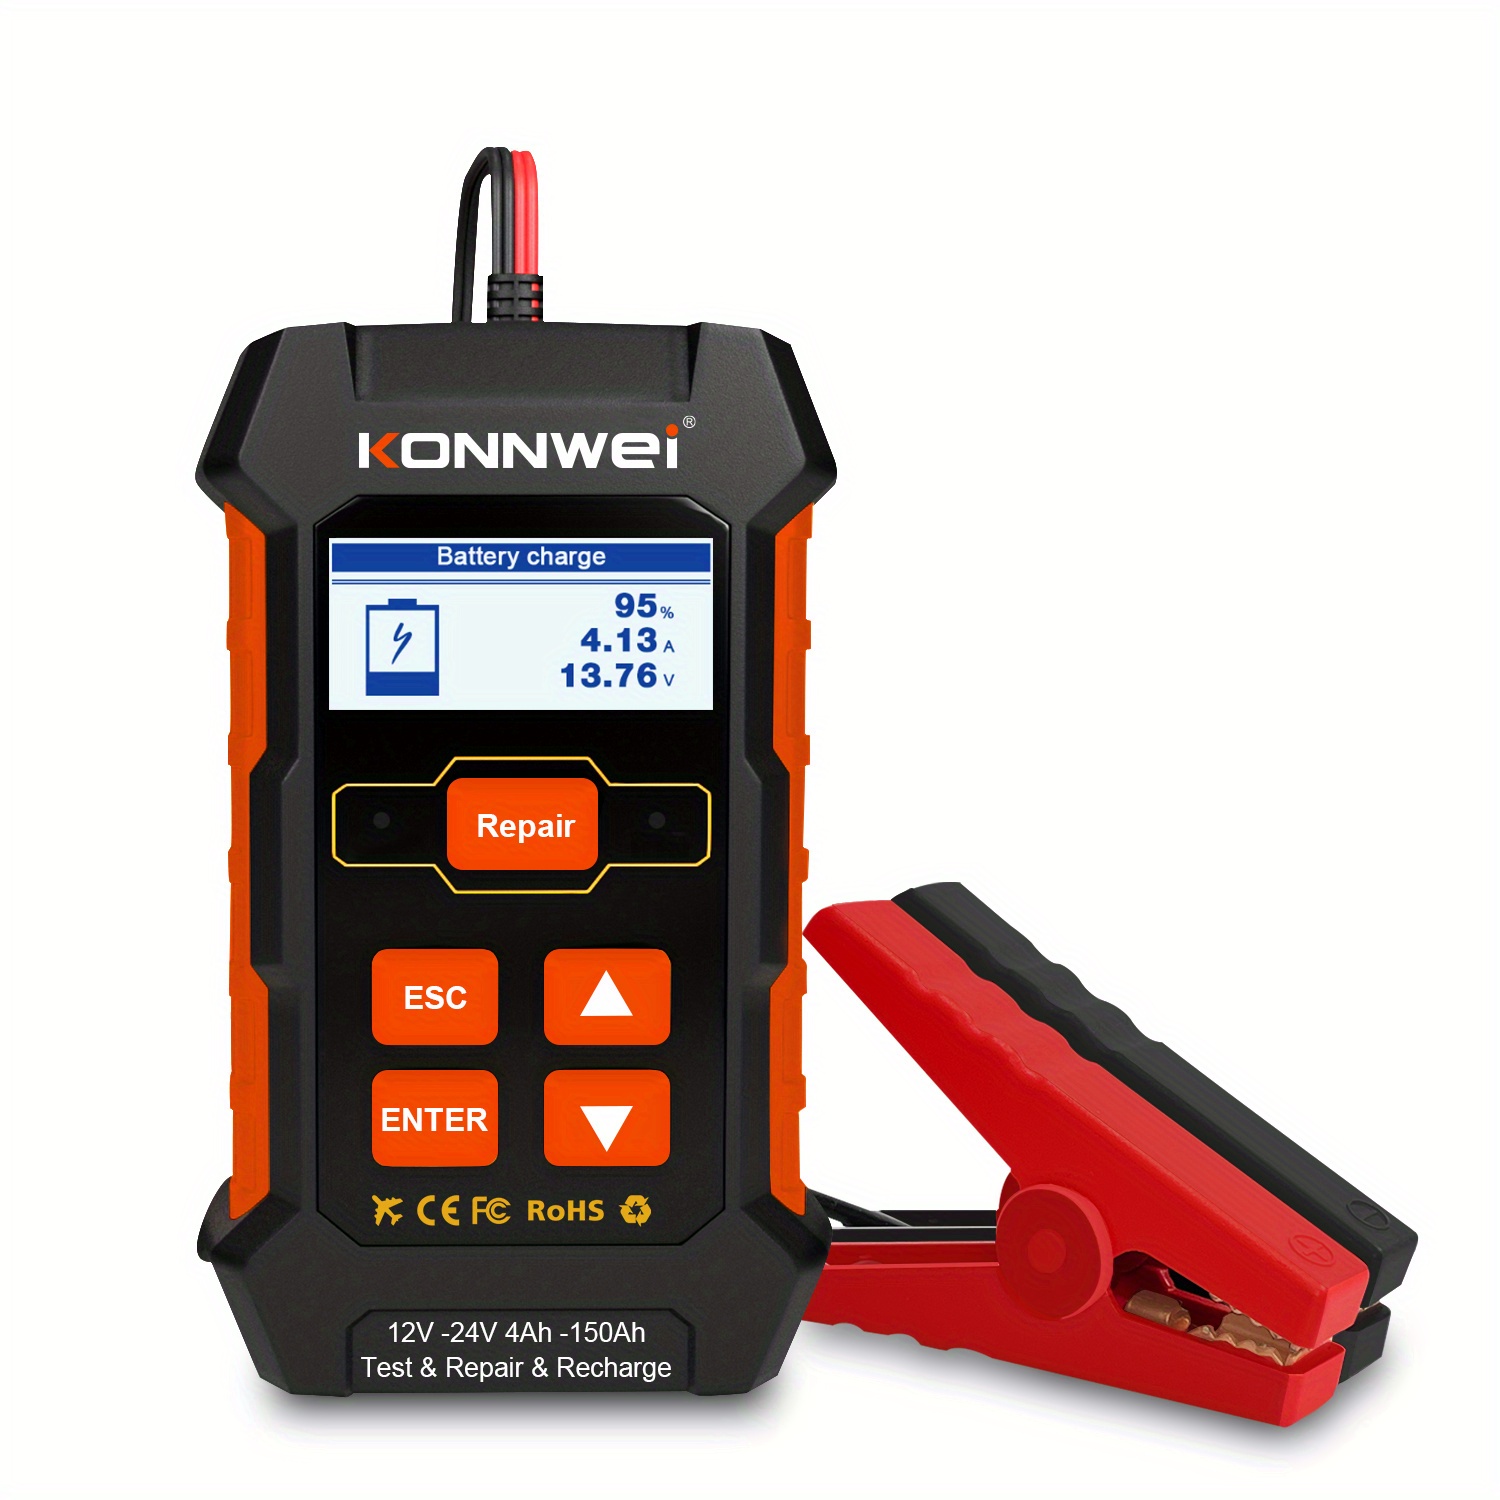 KONNWEI 3 in 1 KW510 5-Amp Fully Automatic Battery Charger, 12V Car Battery  Tester Smart Charger Automotive Pulse Repair Maintainer, Trickle Charger  Battery Desulfator w/Temp Compensation 